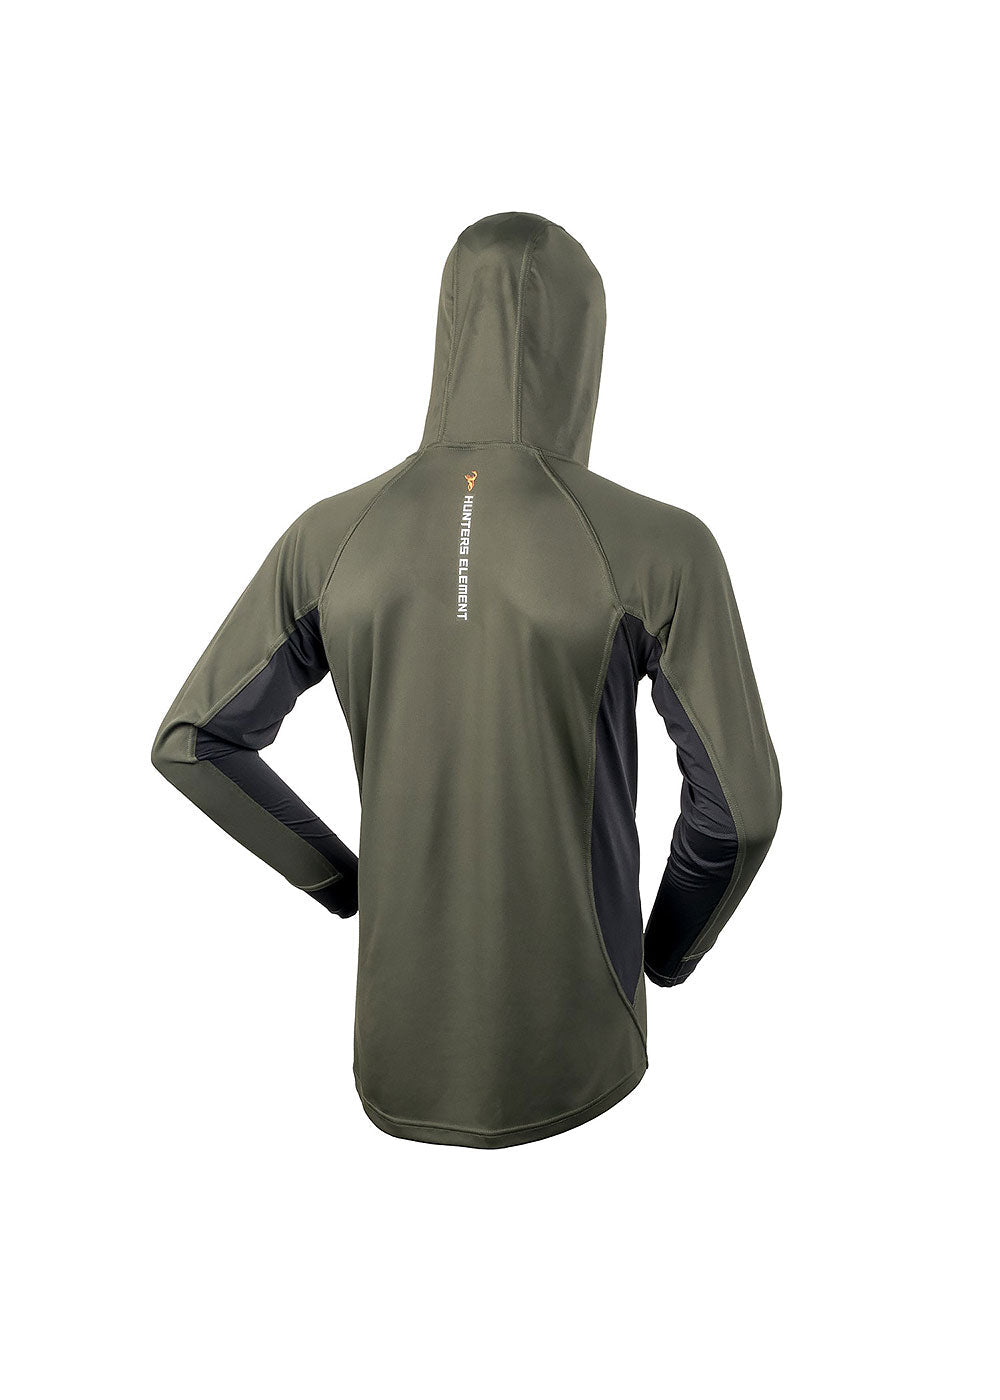 Hunters Element Eclipse Hooded Top - Green